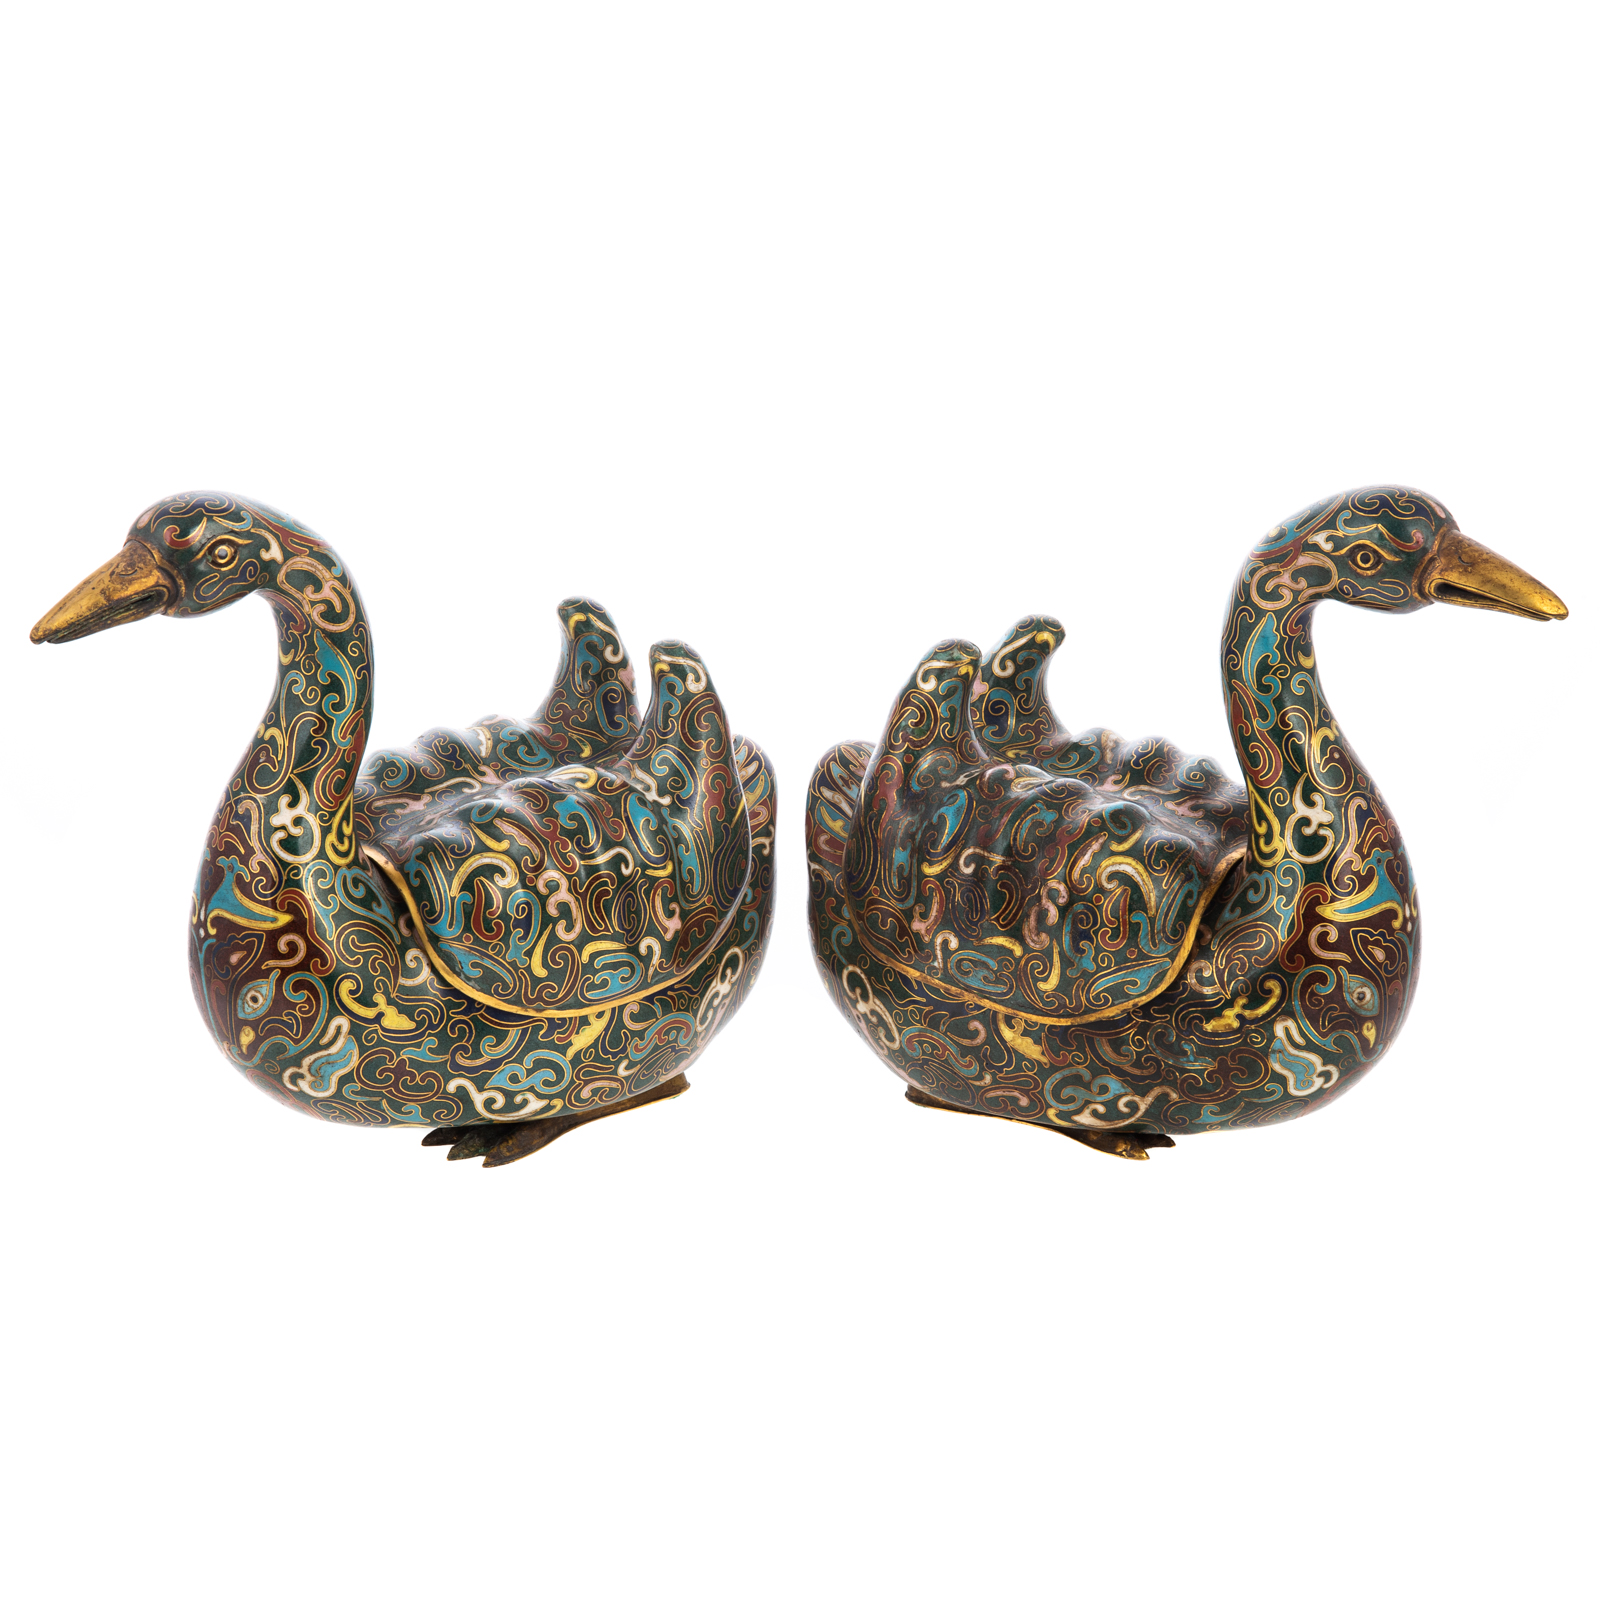 A PAIR OF CHINESE EXPORT CLOISONNE